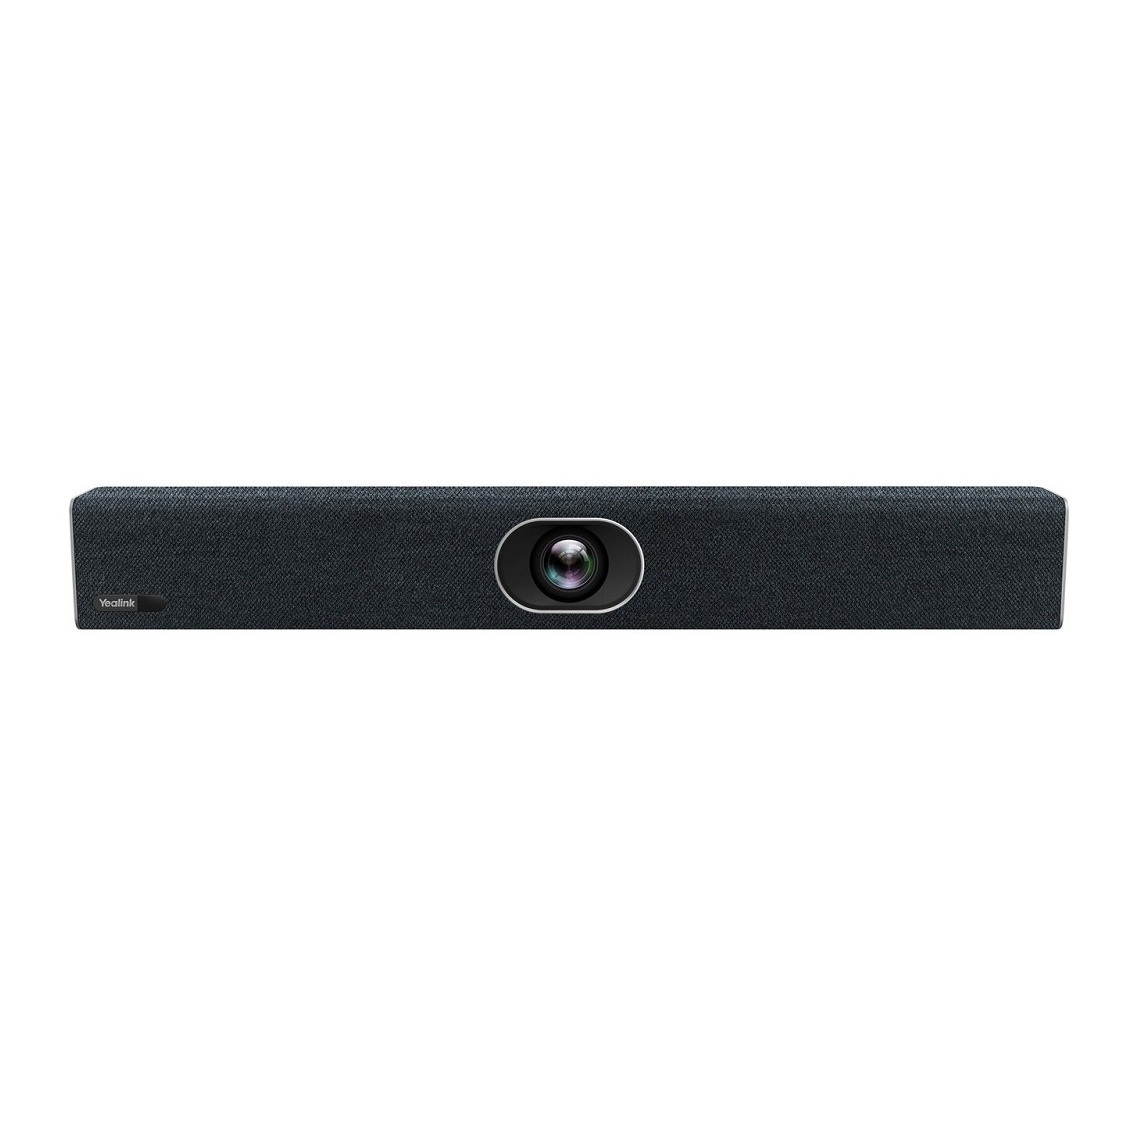 UVC40 All-in-One USB Video Bar · BYOD For simple and smart video conferencing in small and huddle rooms